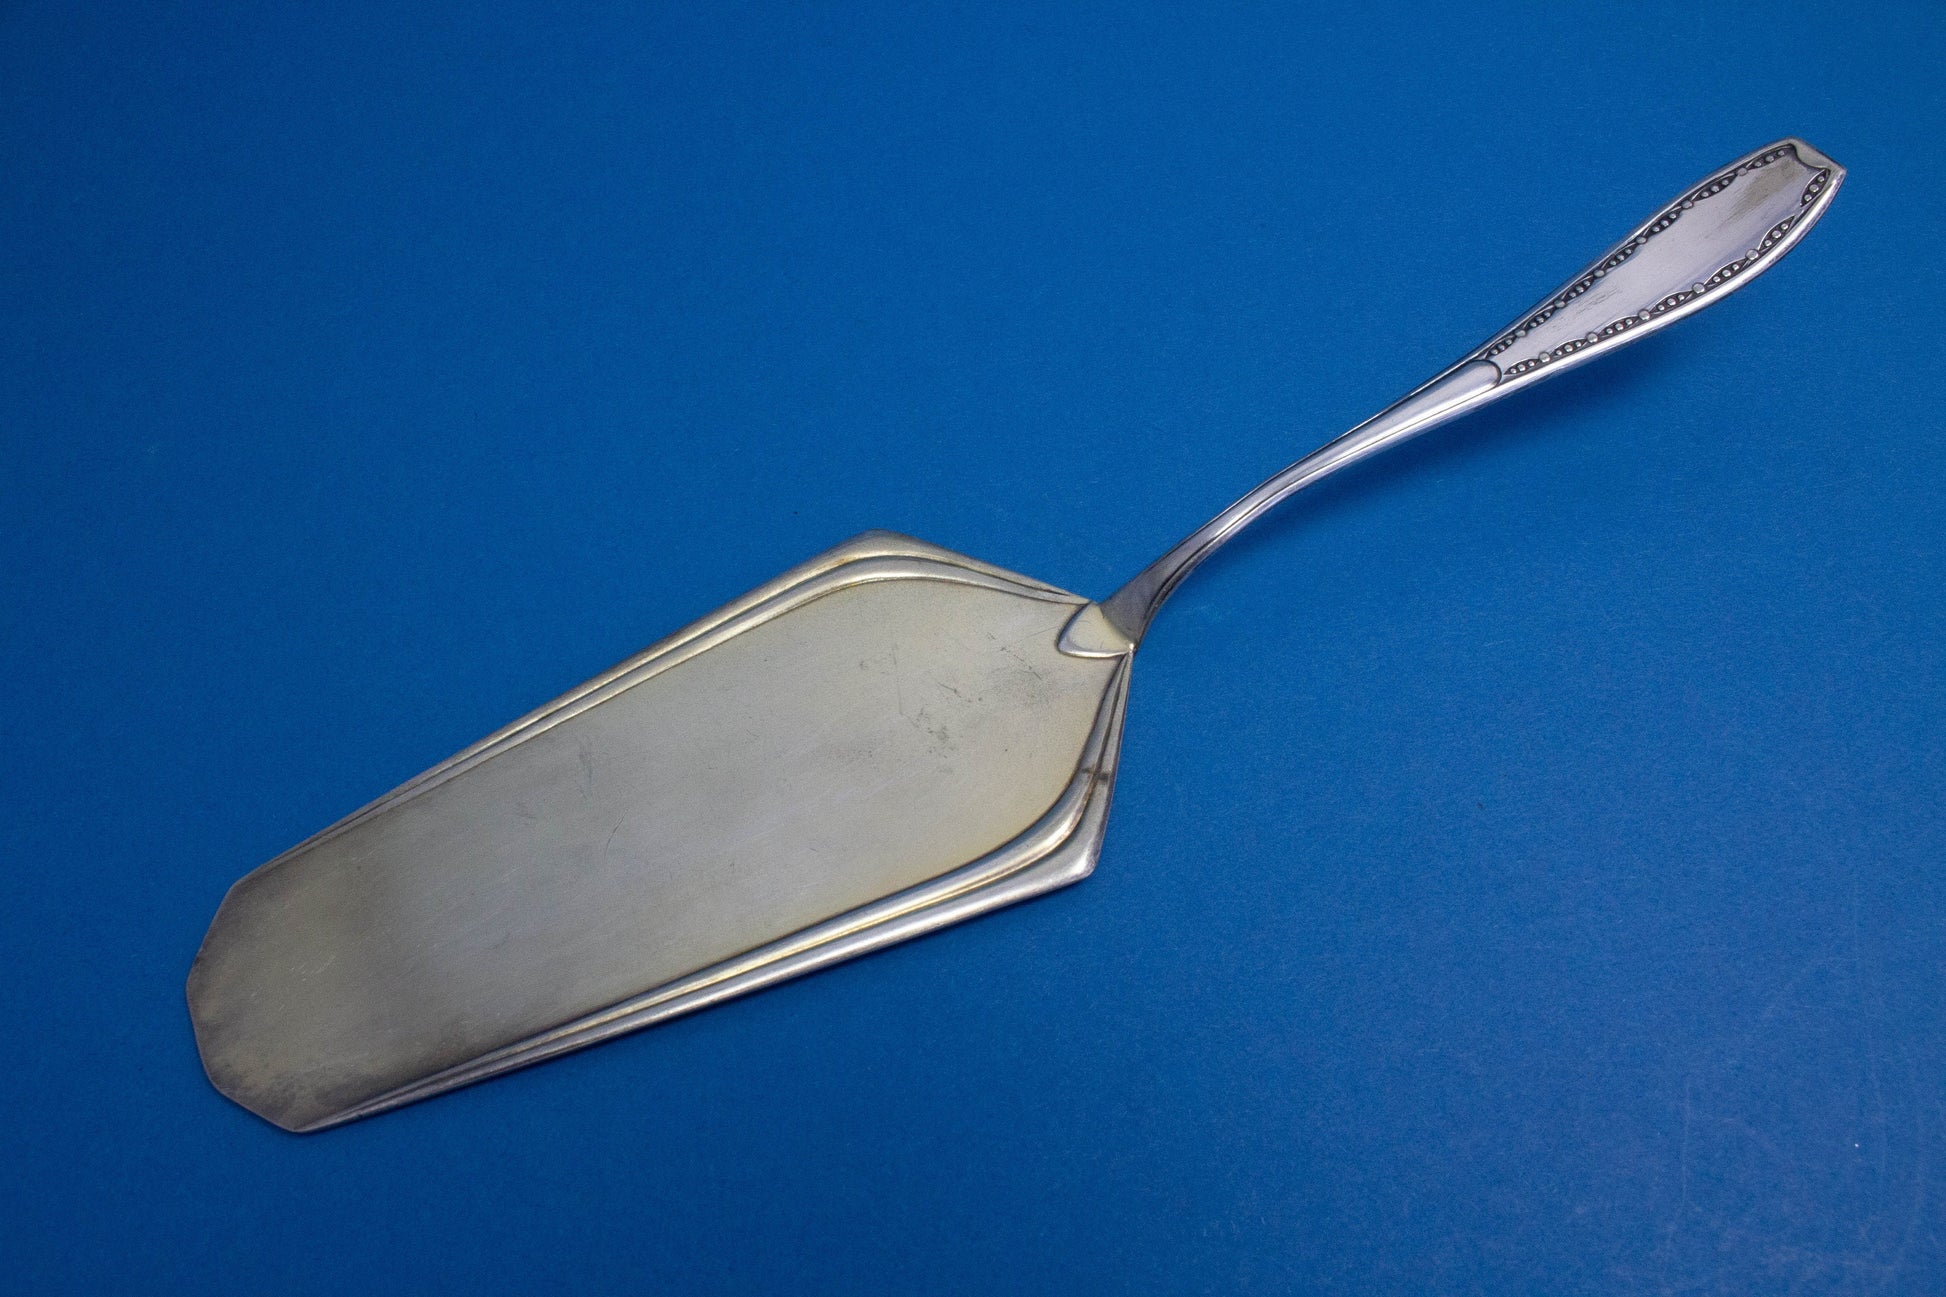 Silver-plated cake server with matching sugar tongs